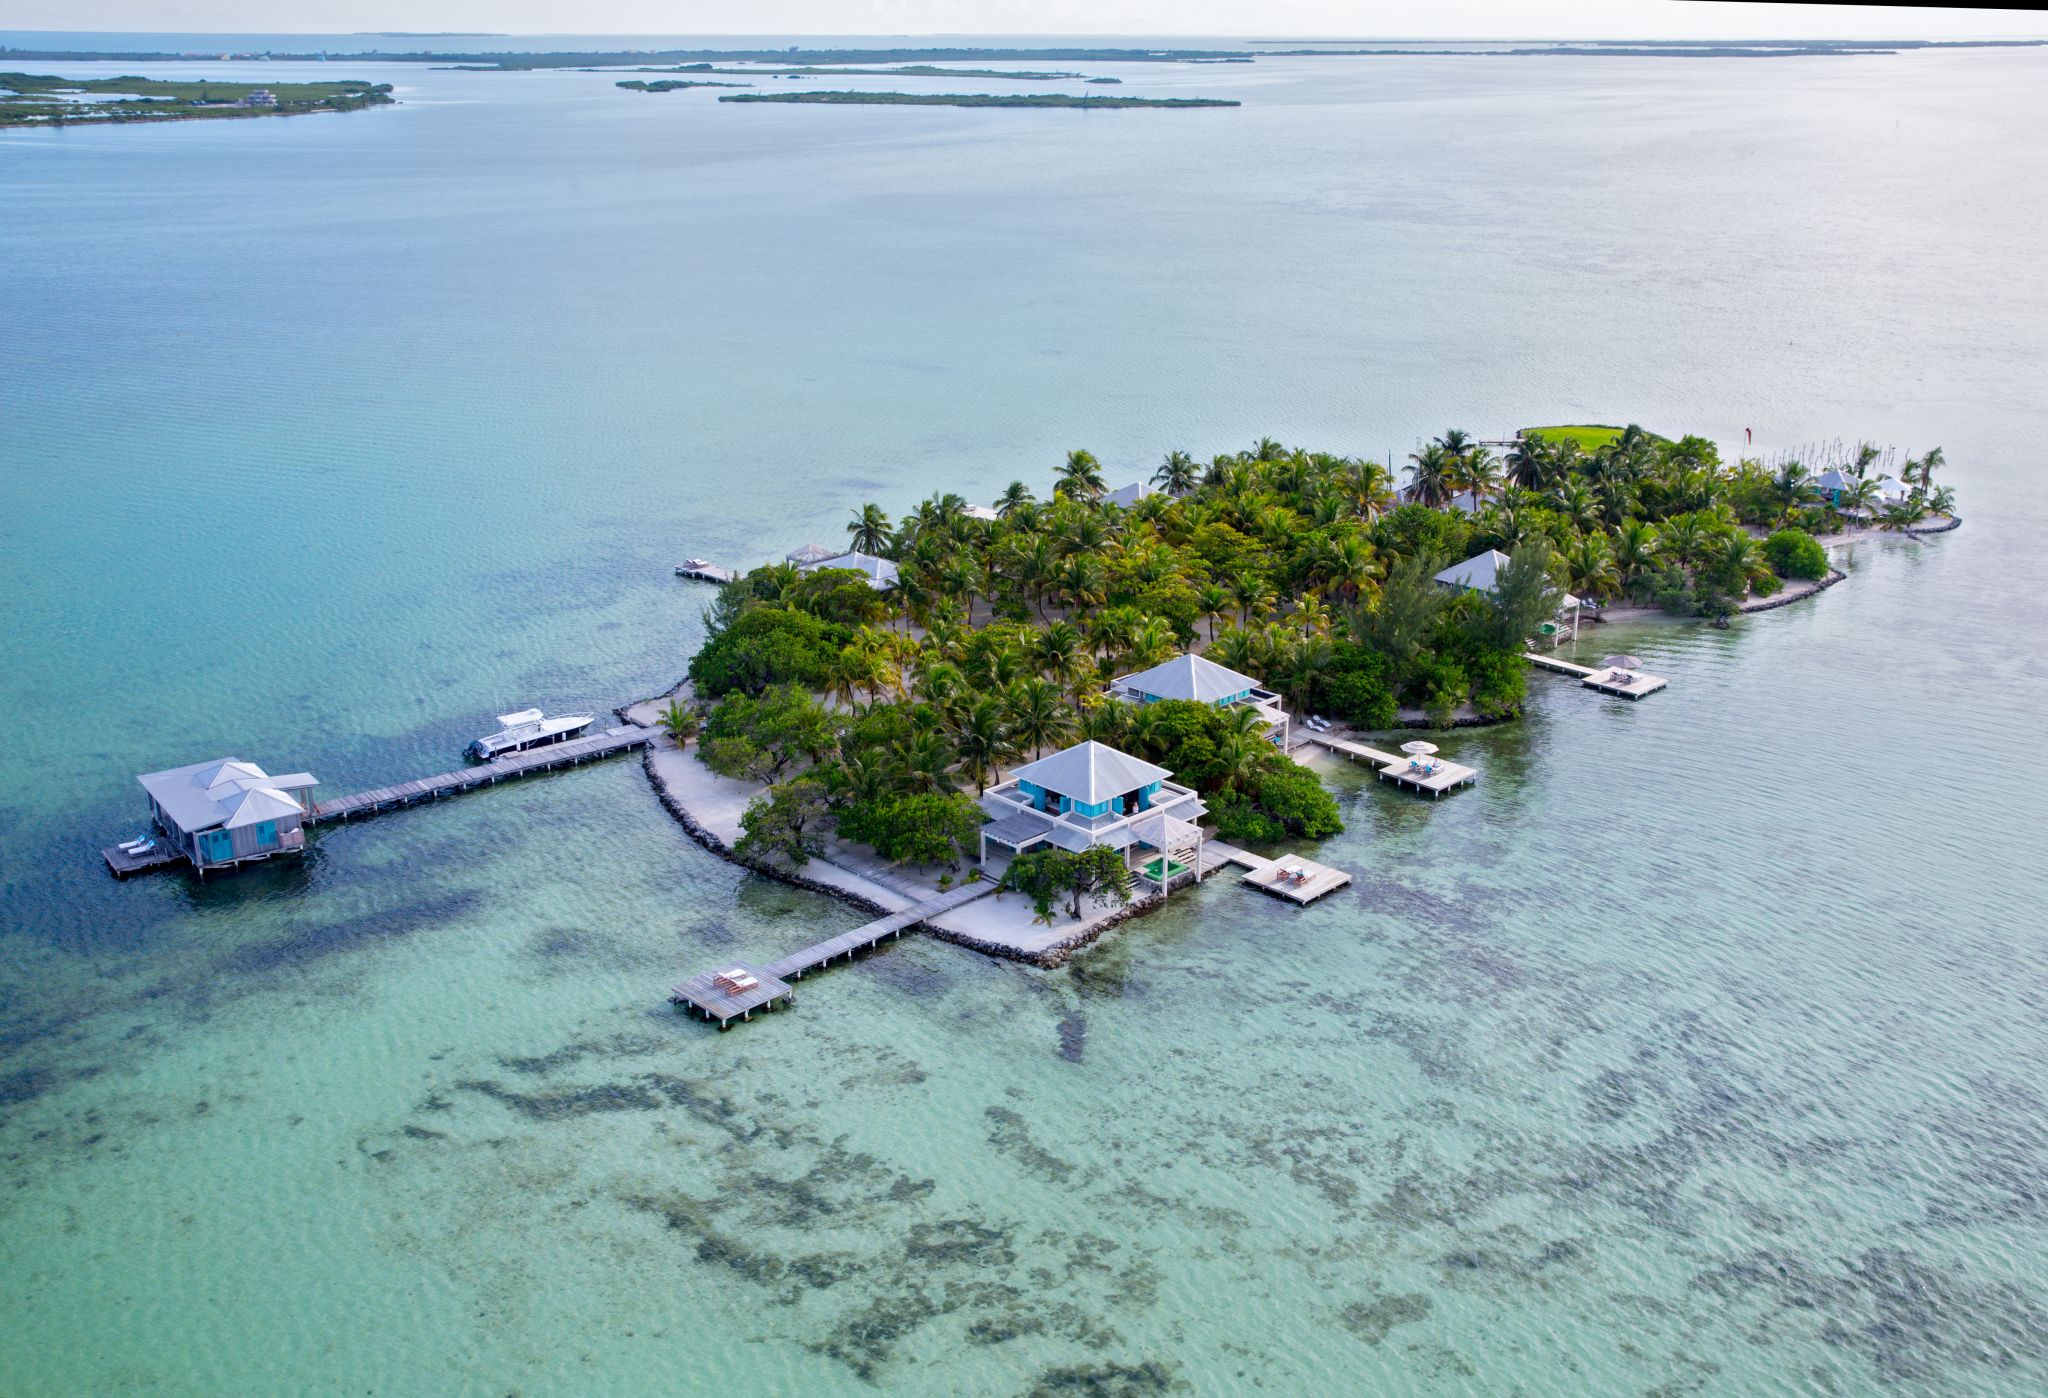 Private Island Resort Welcomes Back Guests to a Secluded Escape